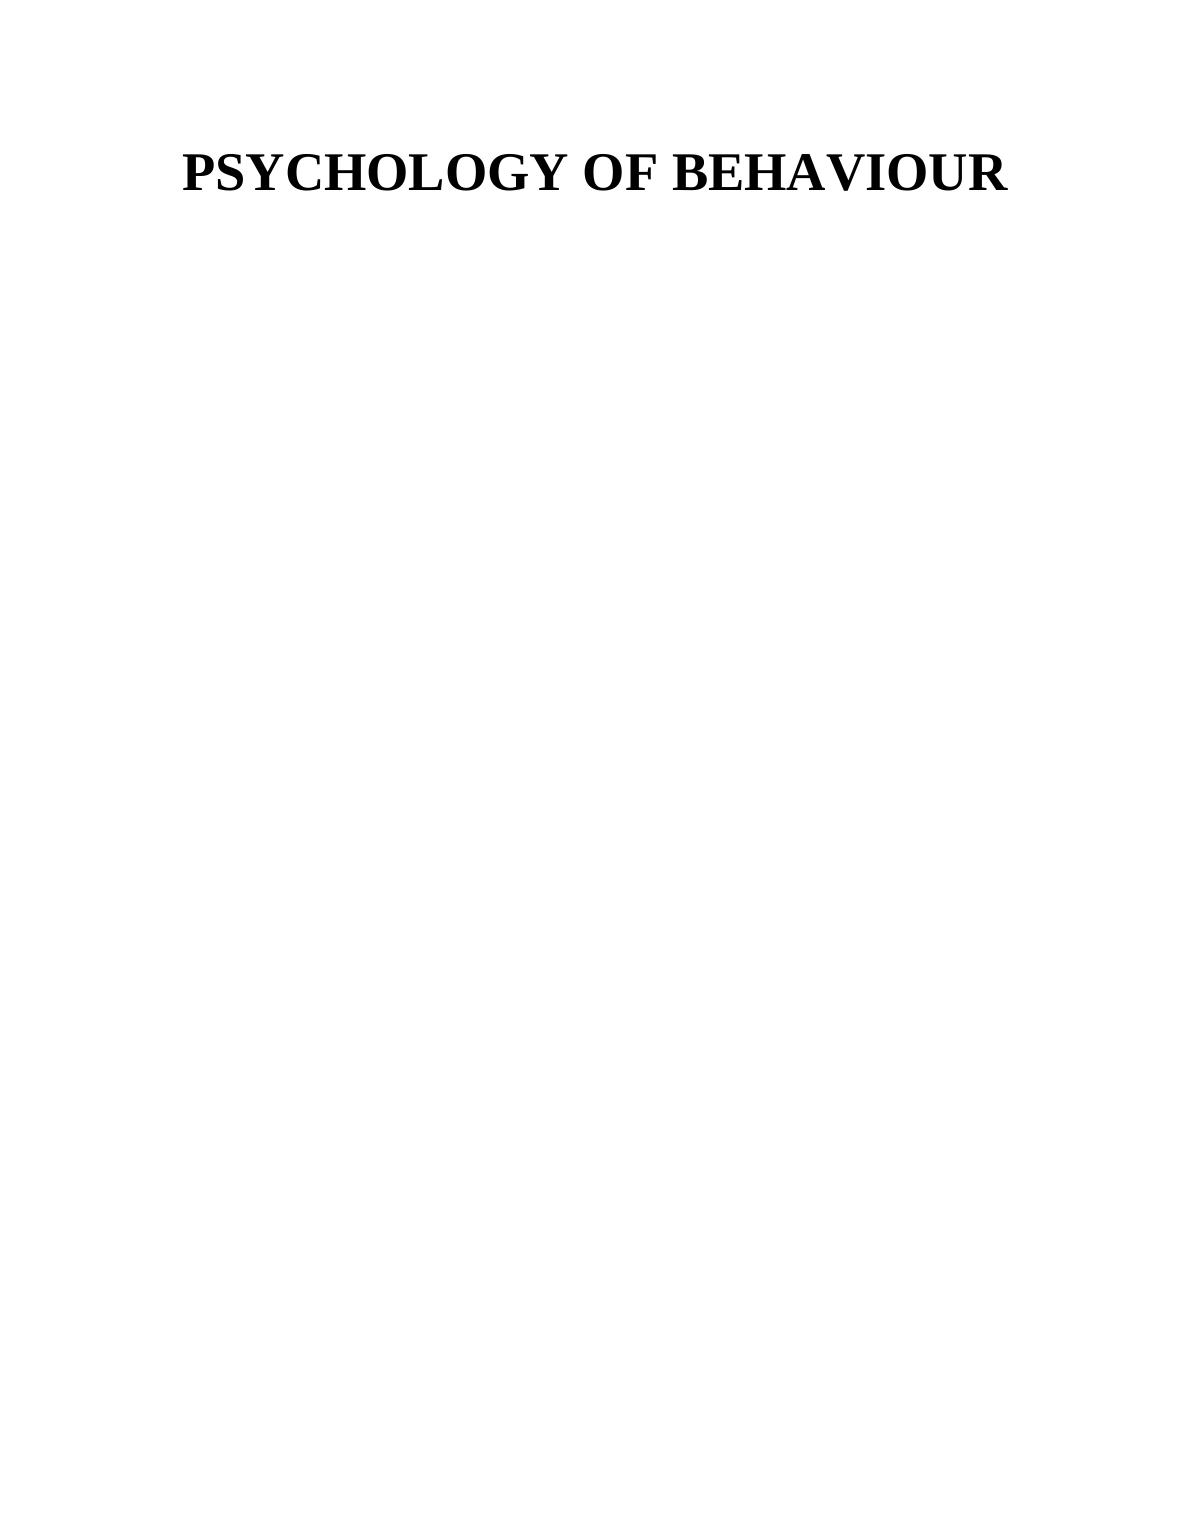 PSYCHOLOGY OF BEHAVIOUR TABLE OF CONTENTS INTRODUCTION 1 MAIN BODY1 P1. Description of psychological perspectives and effects on human behaviour_1